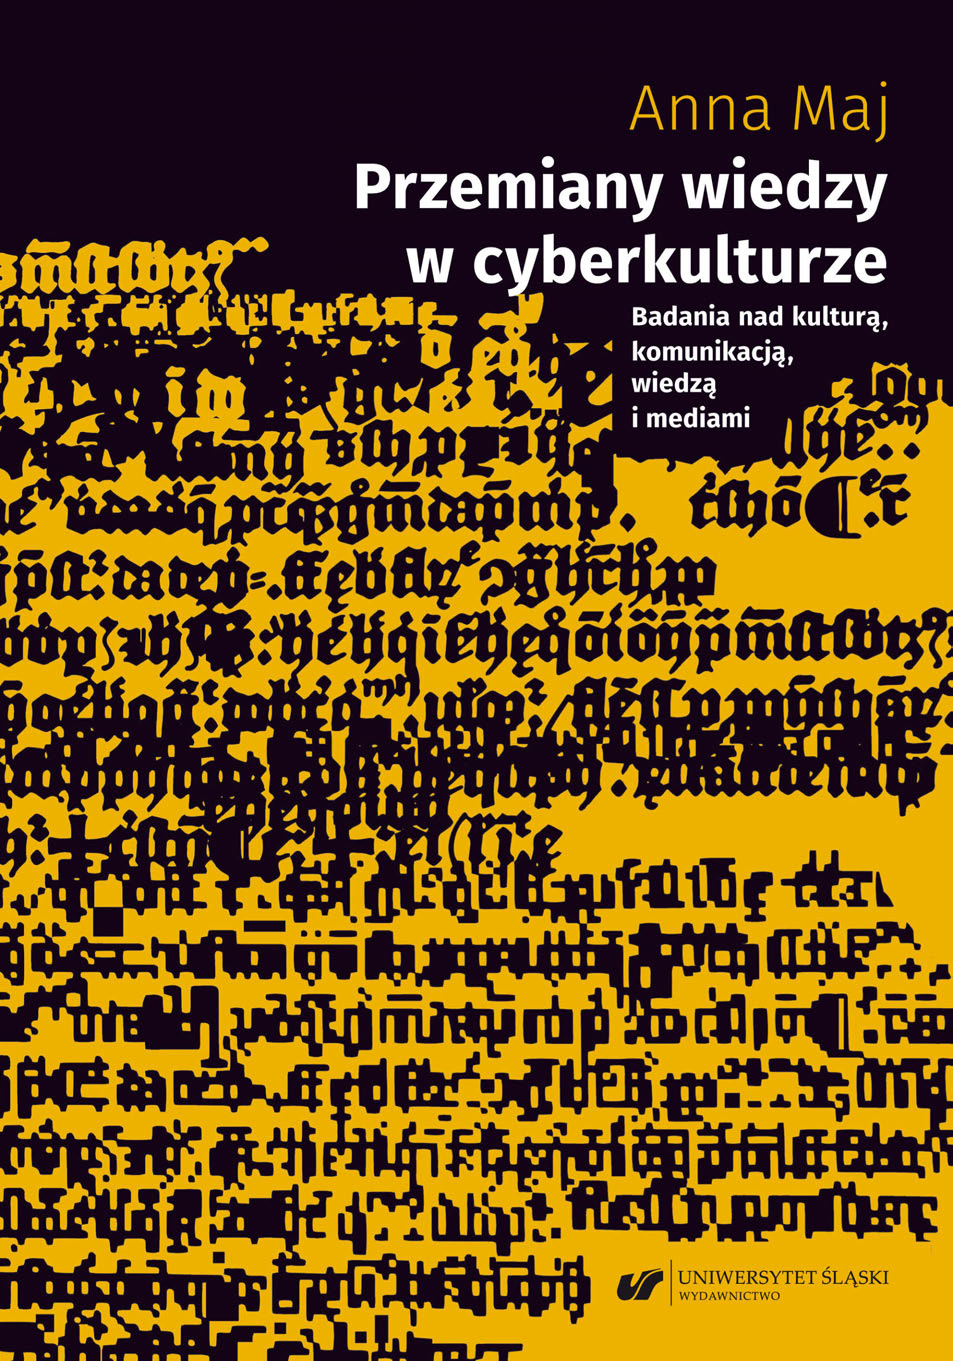 Transformations of knowledge in cyberculture. Research on culture, communication, knowledge, and media